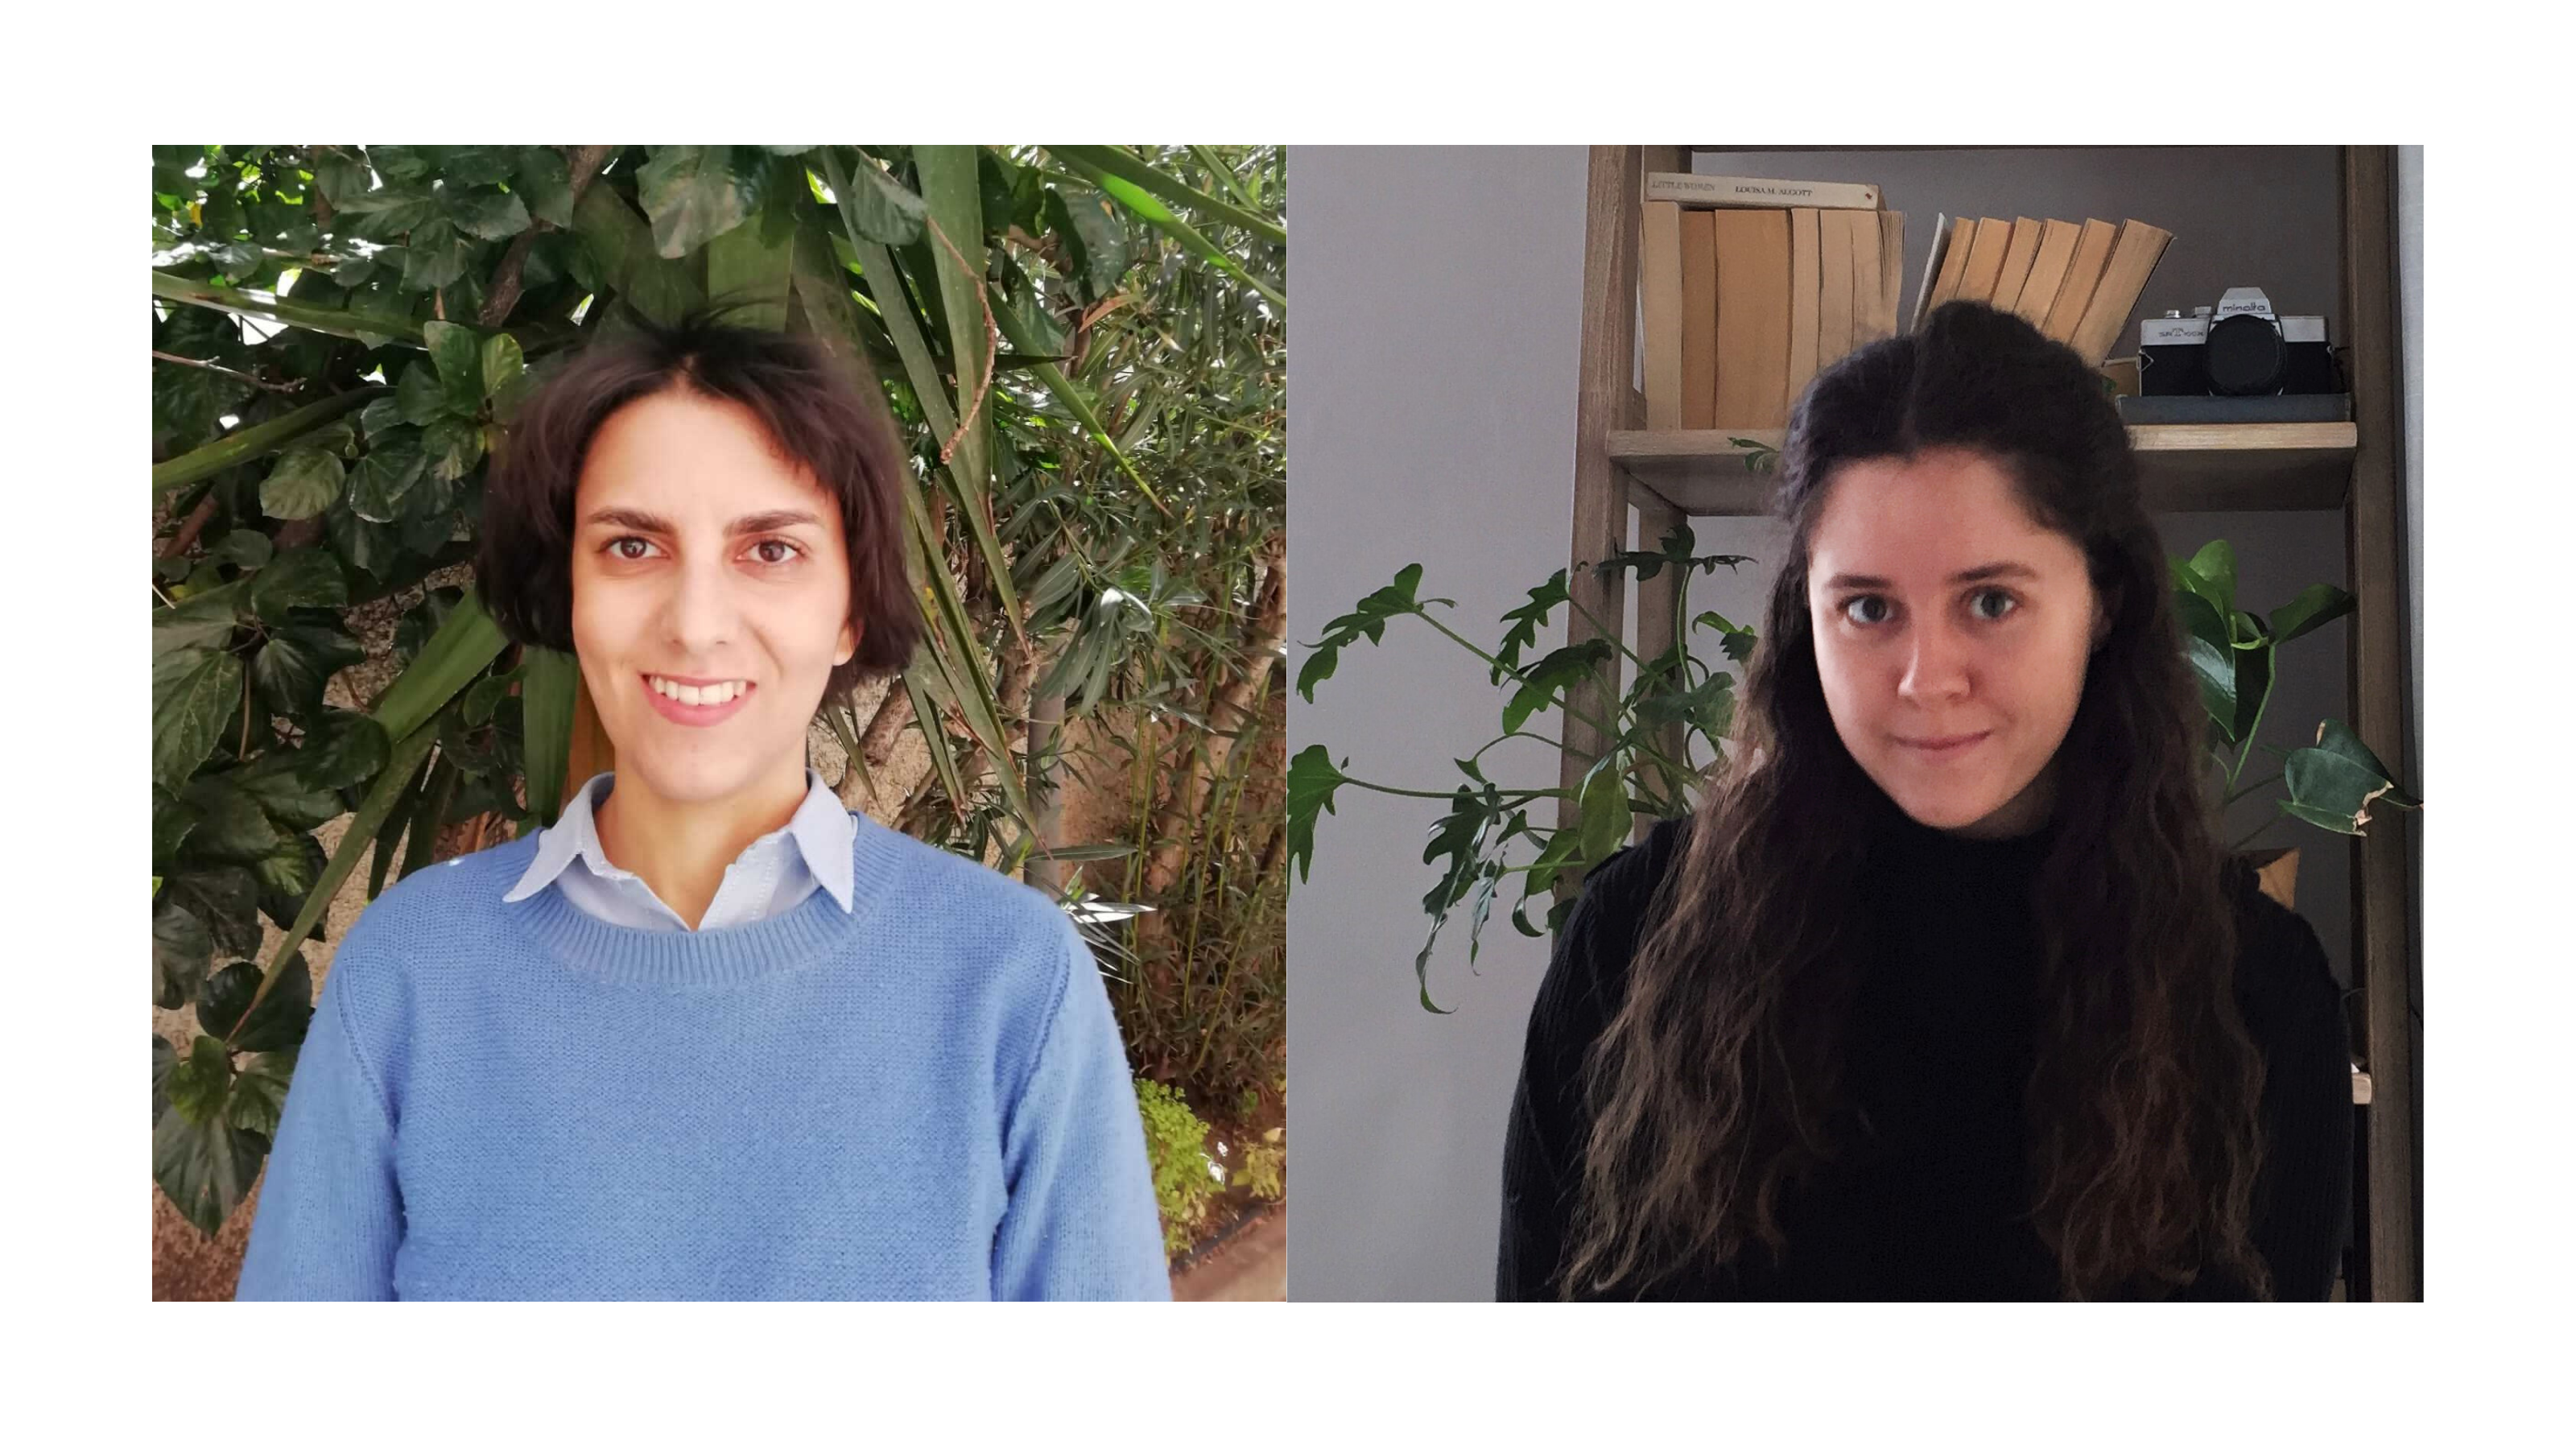 Our Policy team is growing: Welcome to our new staff members Irene Amoroso and Jana Hugo!